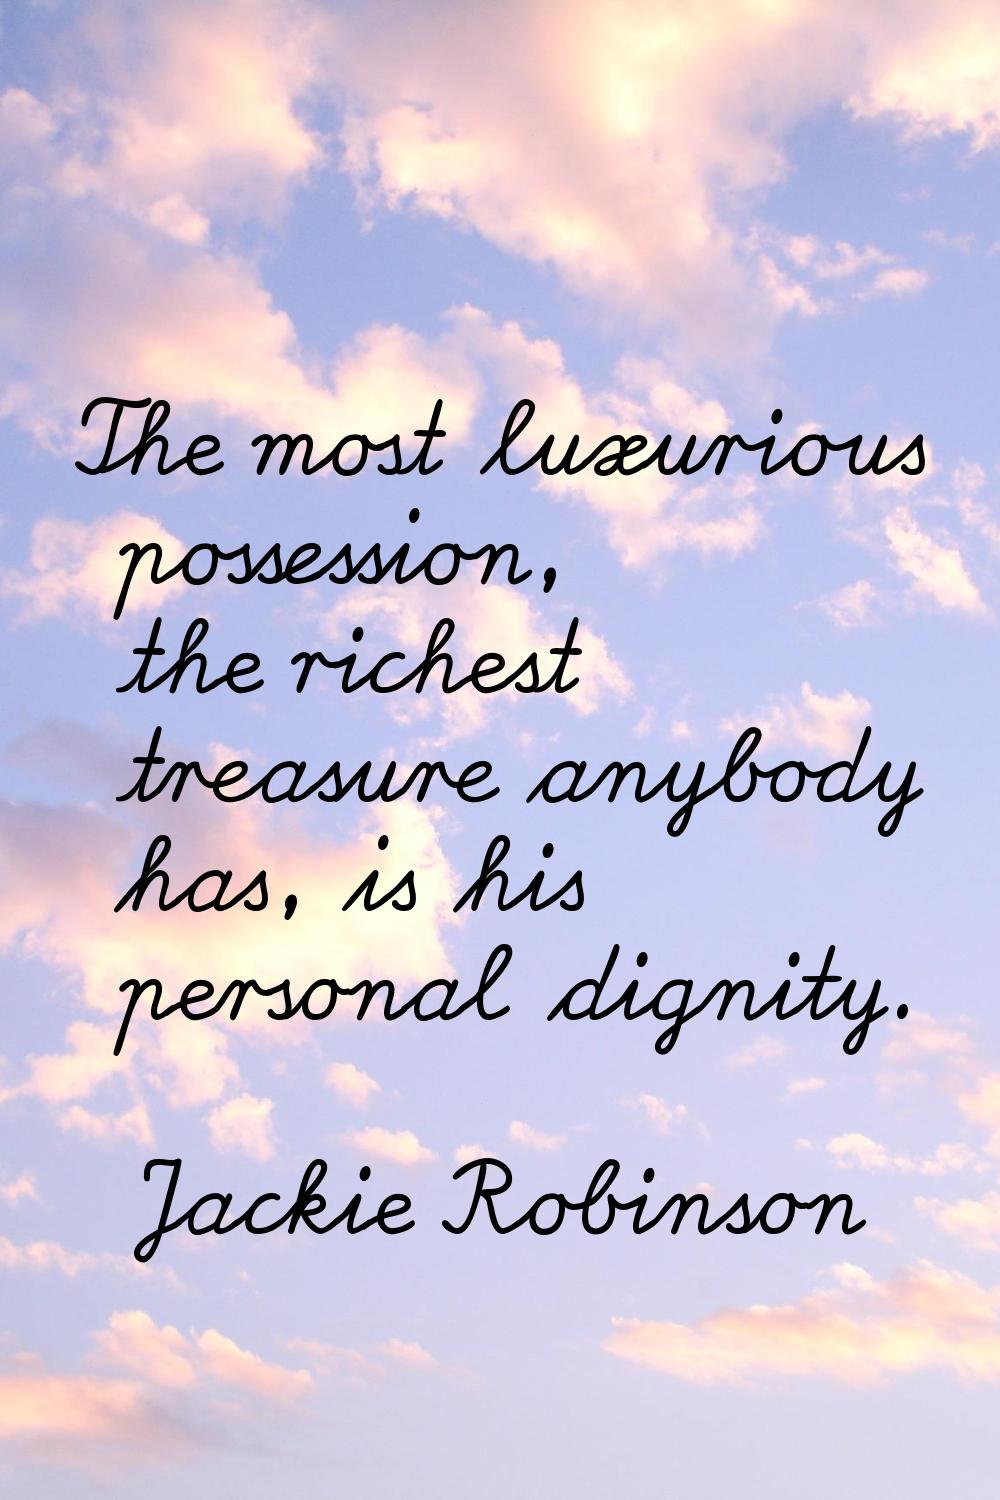 The most luxurious possession, the richest treasure anybody has, is his personal dignity.